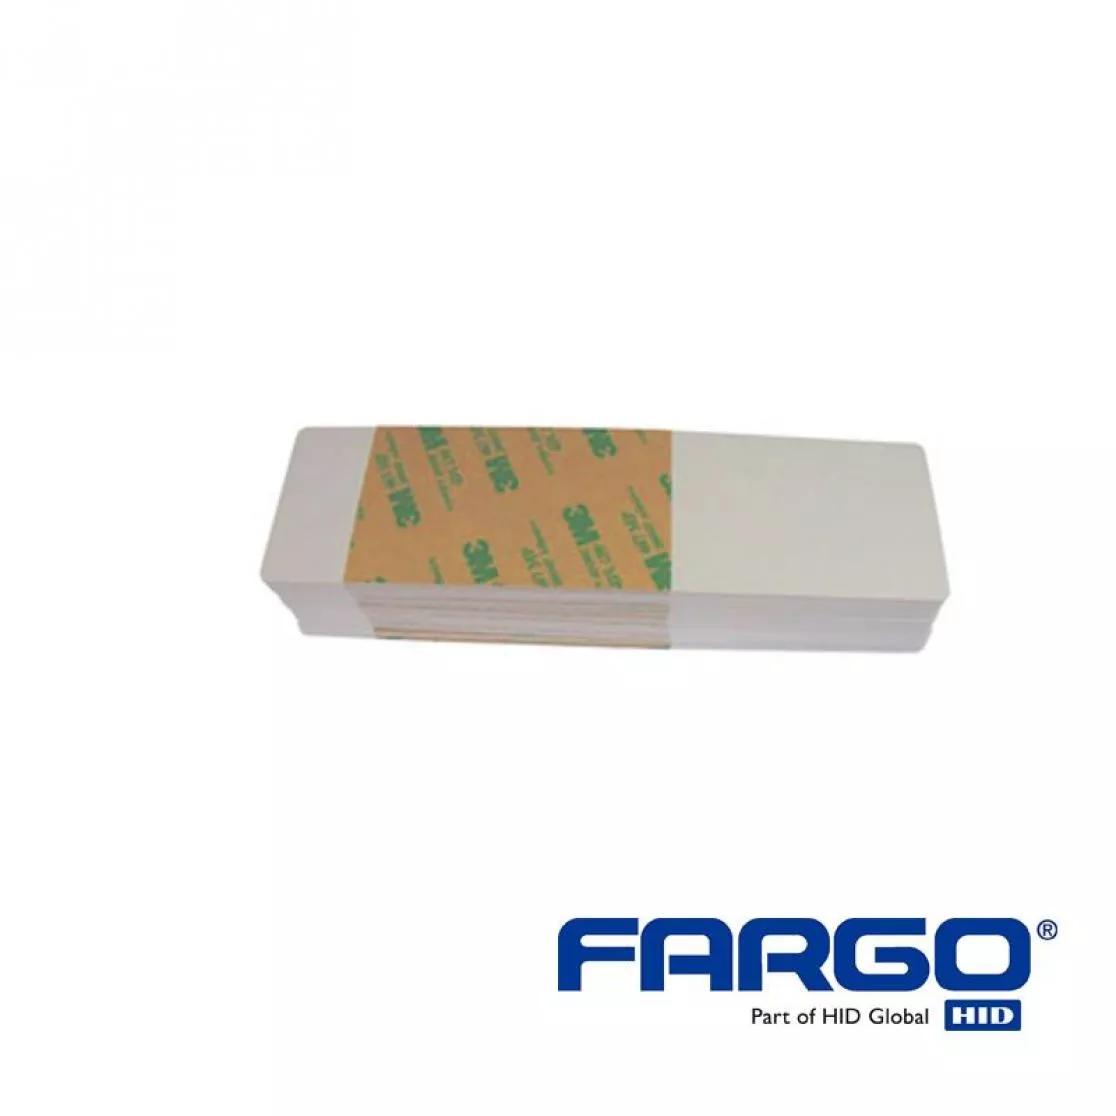 Cleaning cards for hid fargo HDP5000 card printer